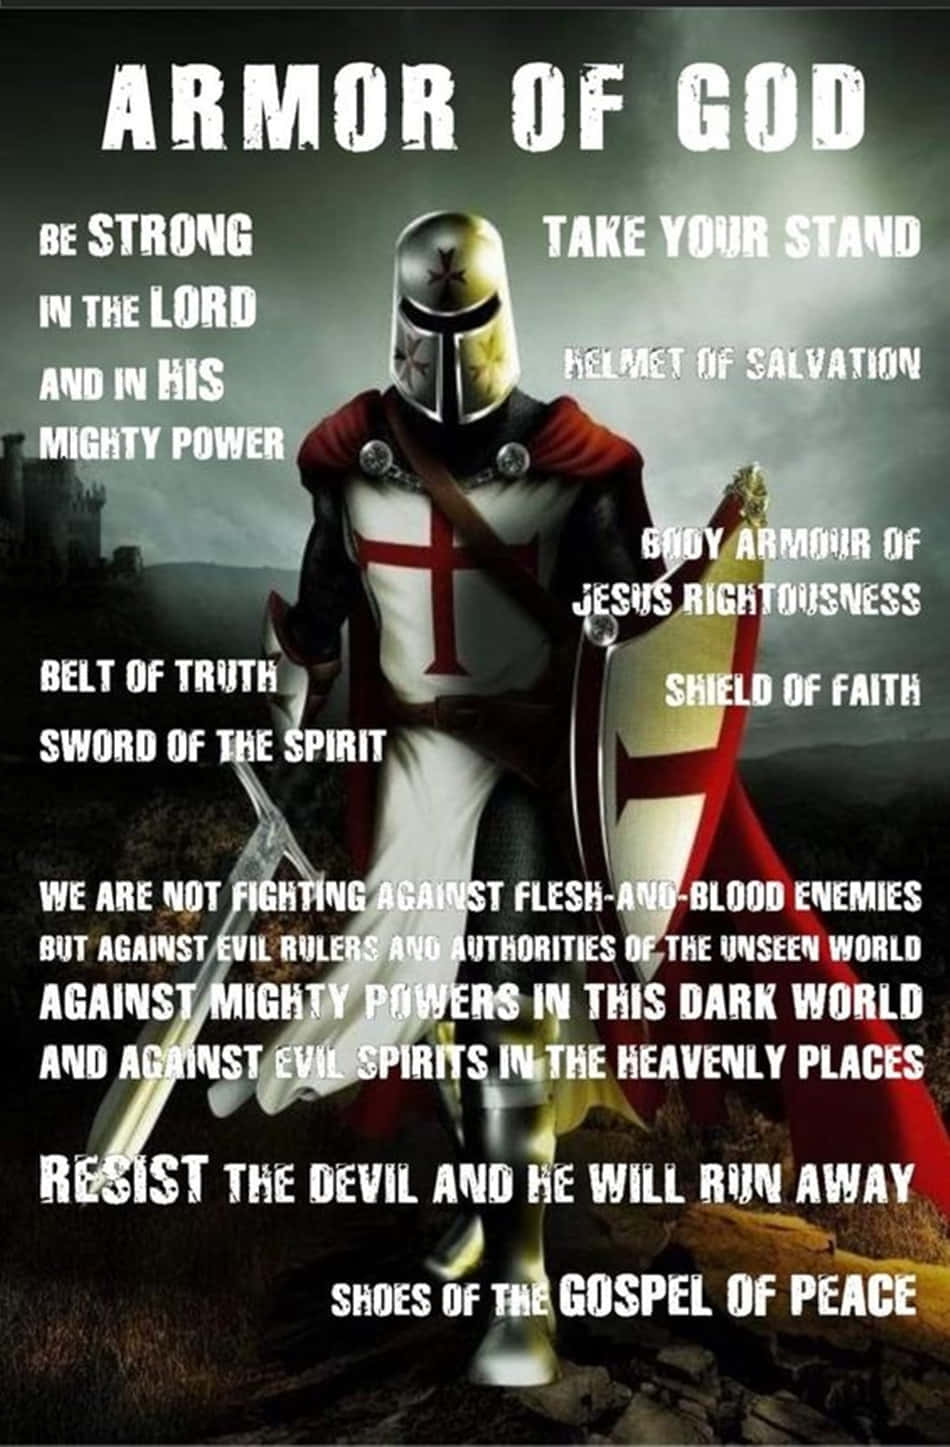 Put on the whole armor of God. Wallpaper